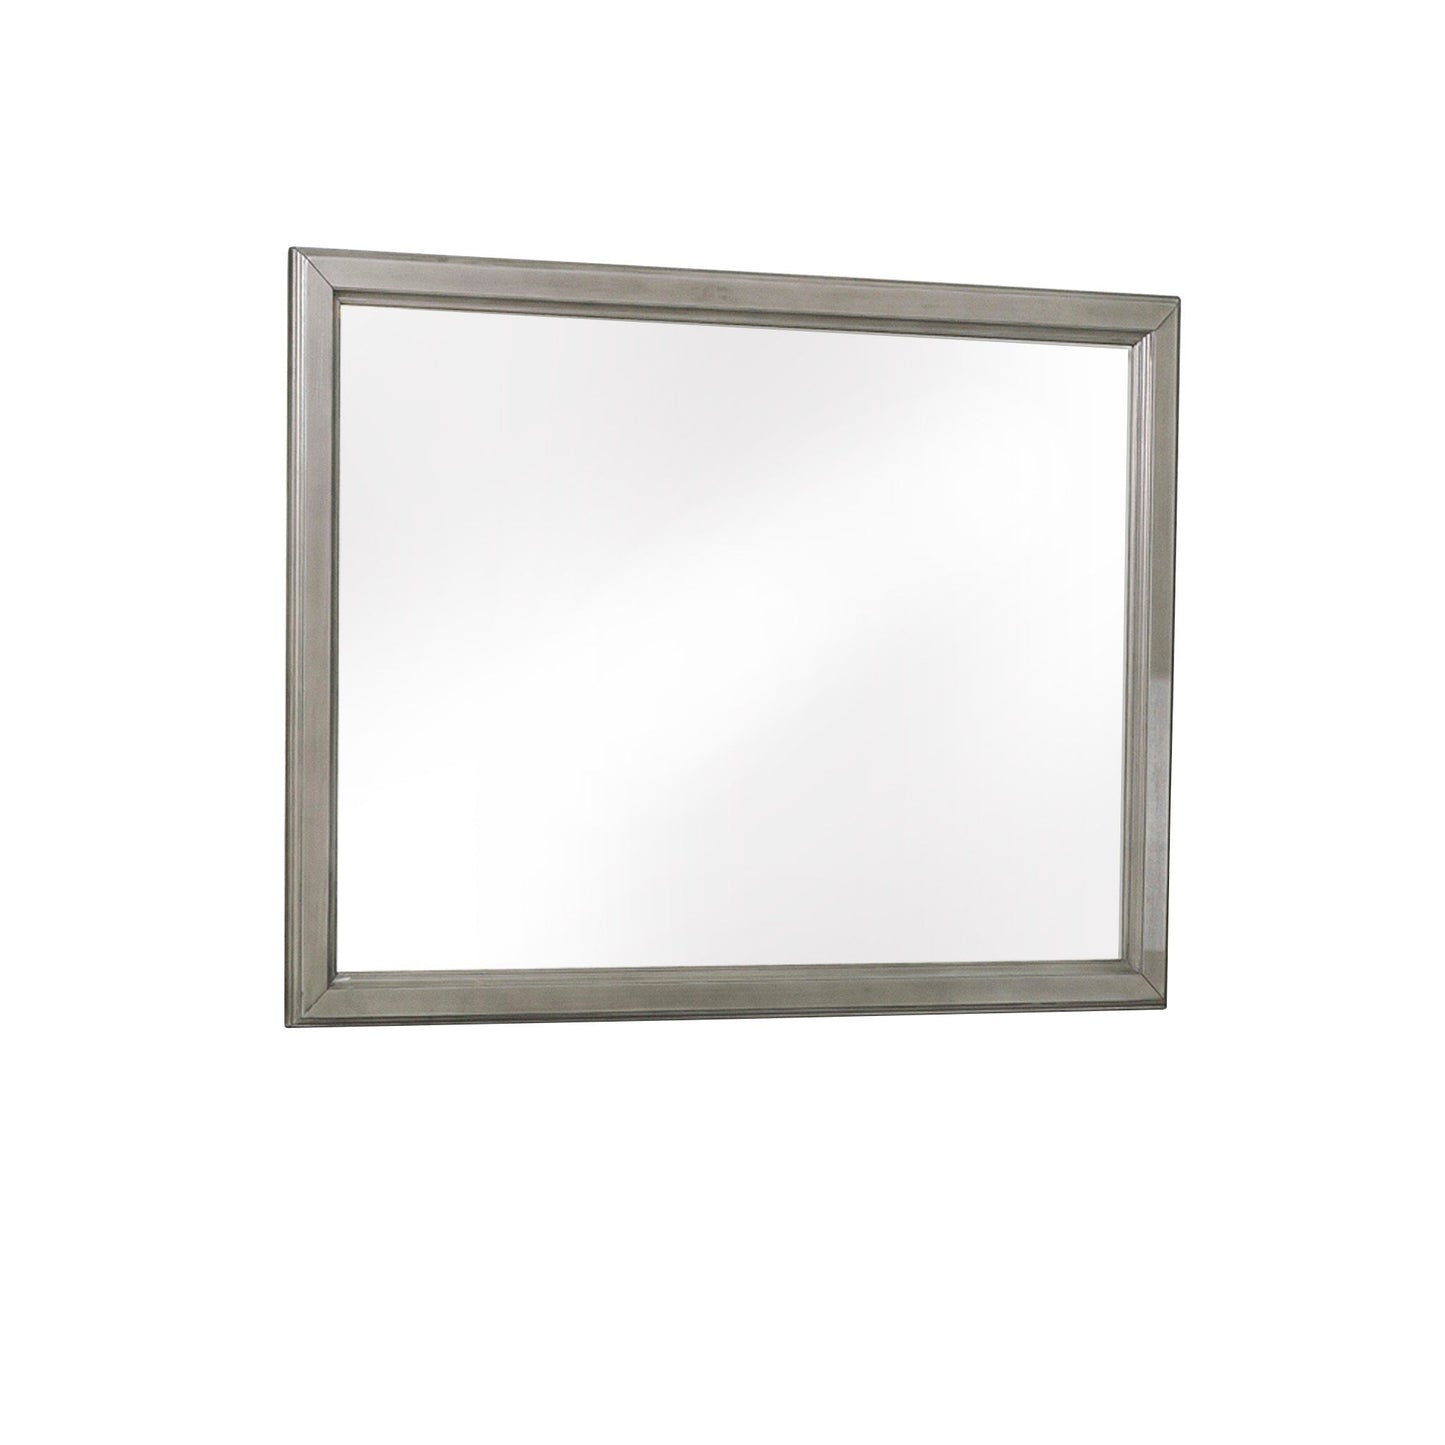 Benzara Gray Wooden Square Mirror With Molded Details and Dual Texture